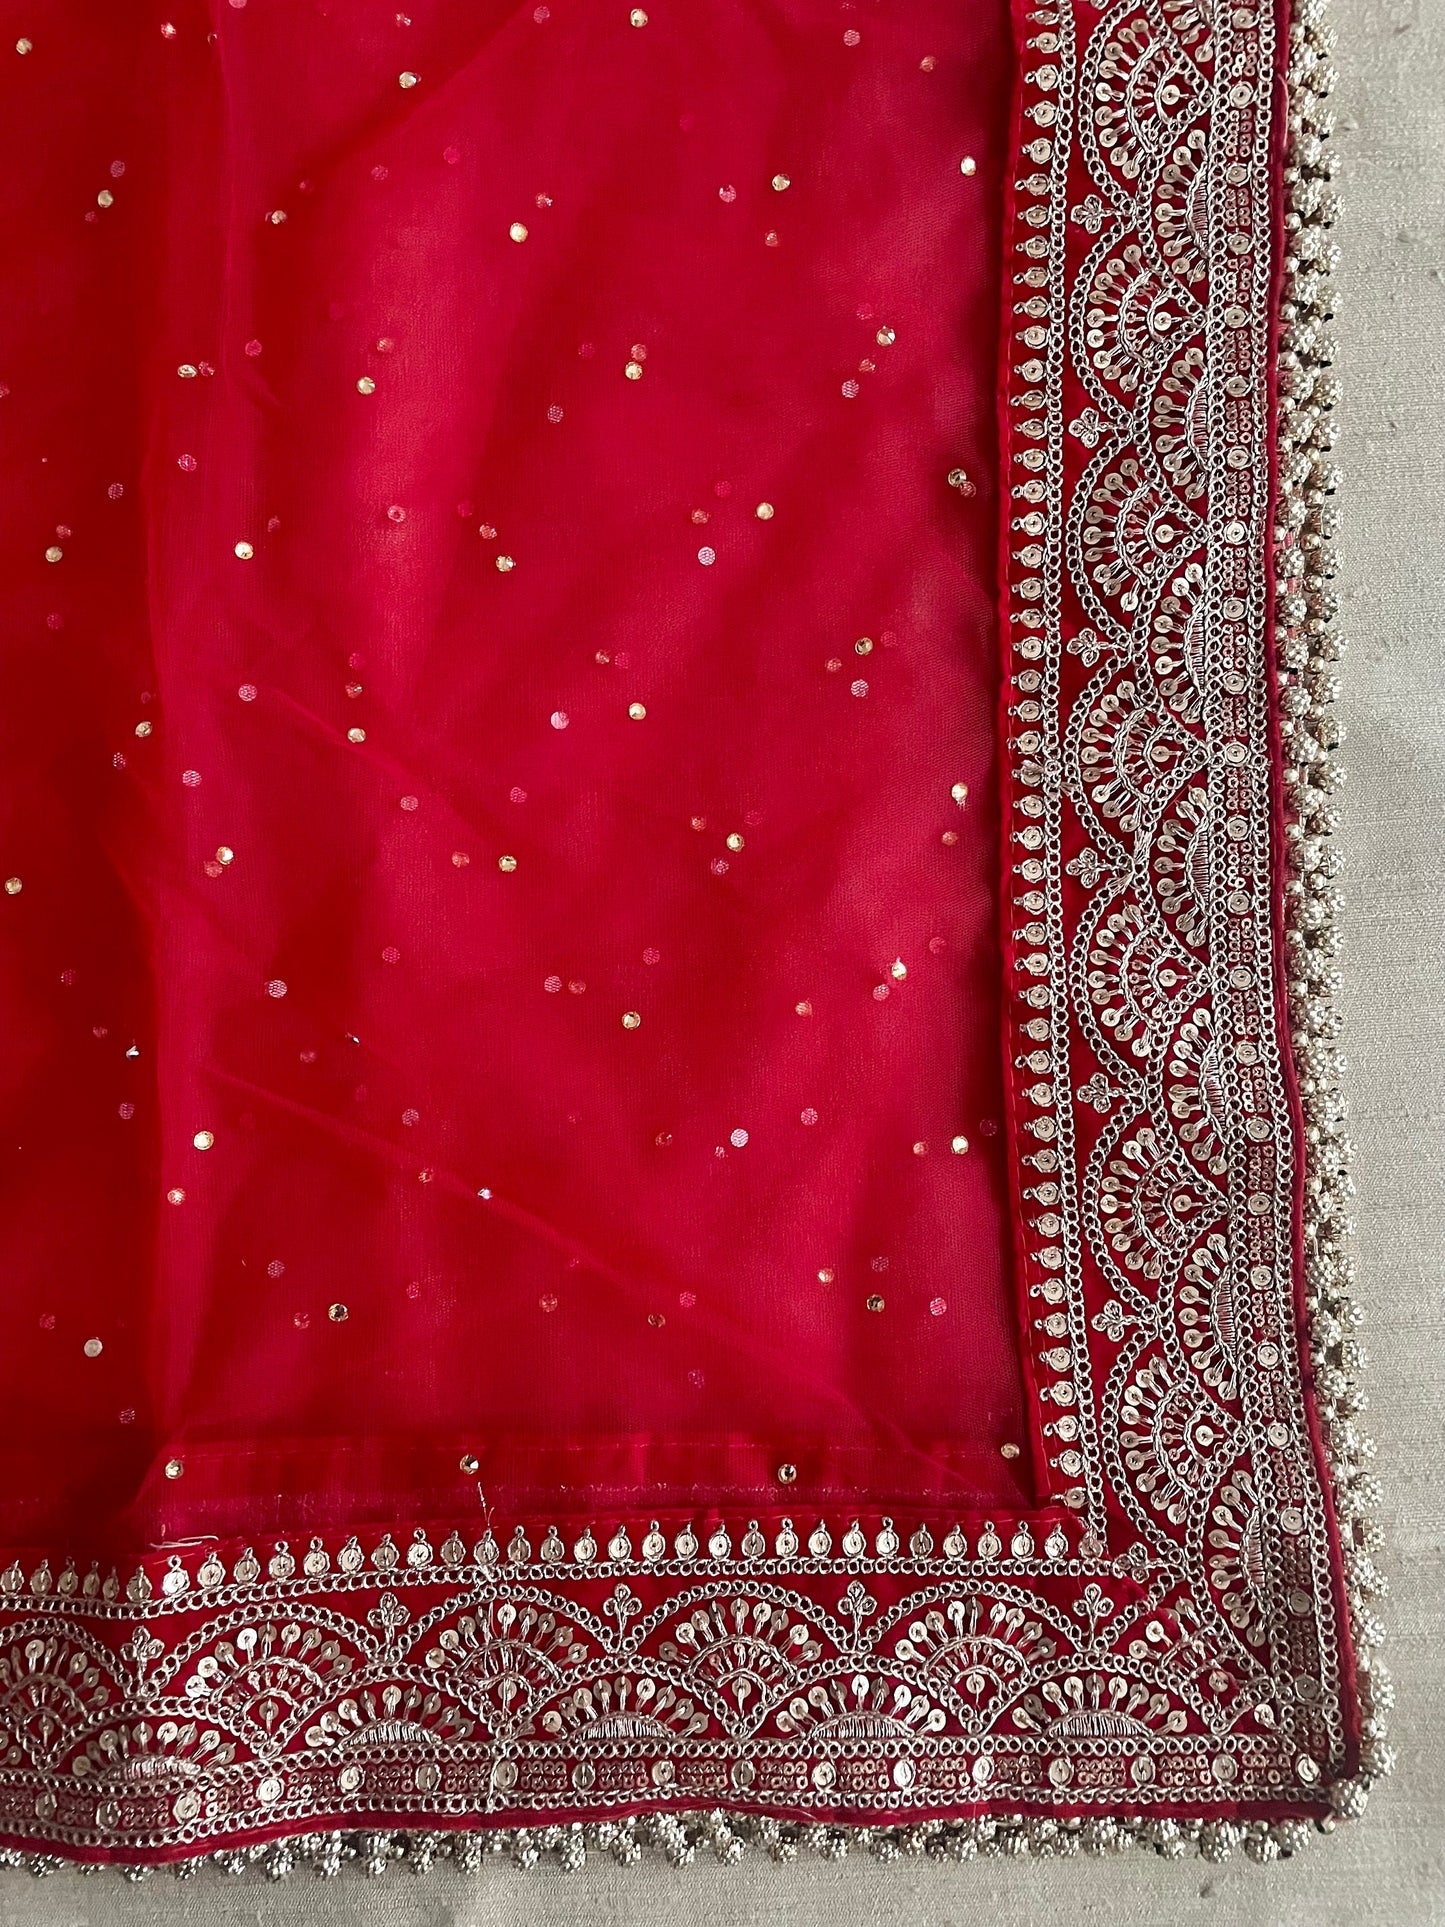 Red Dupatta for Karvachauth Dressing Bridal Net Double Second Duppatta for Wedding Outfit Lehenga Chunni Ceremony Sagan Scarf Nikaah